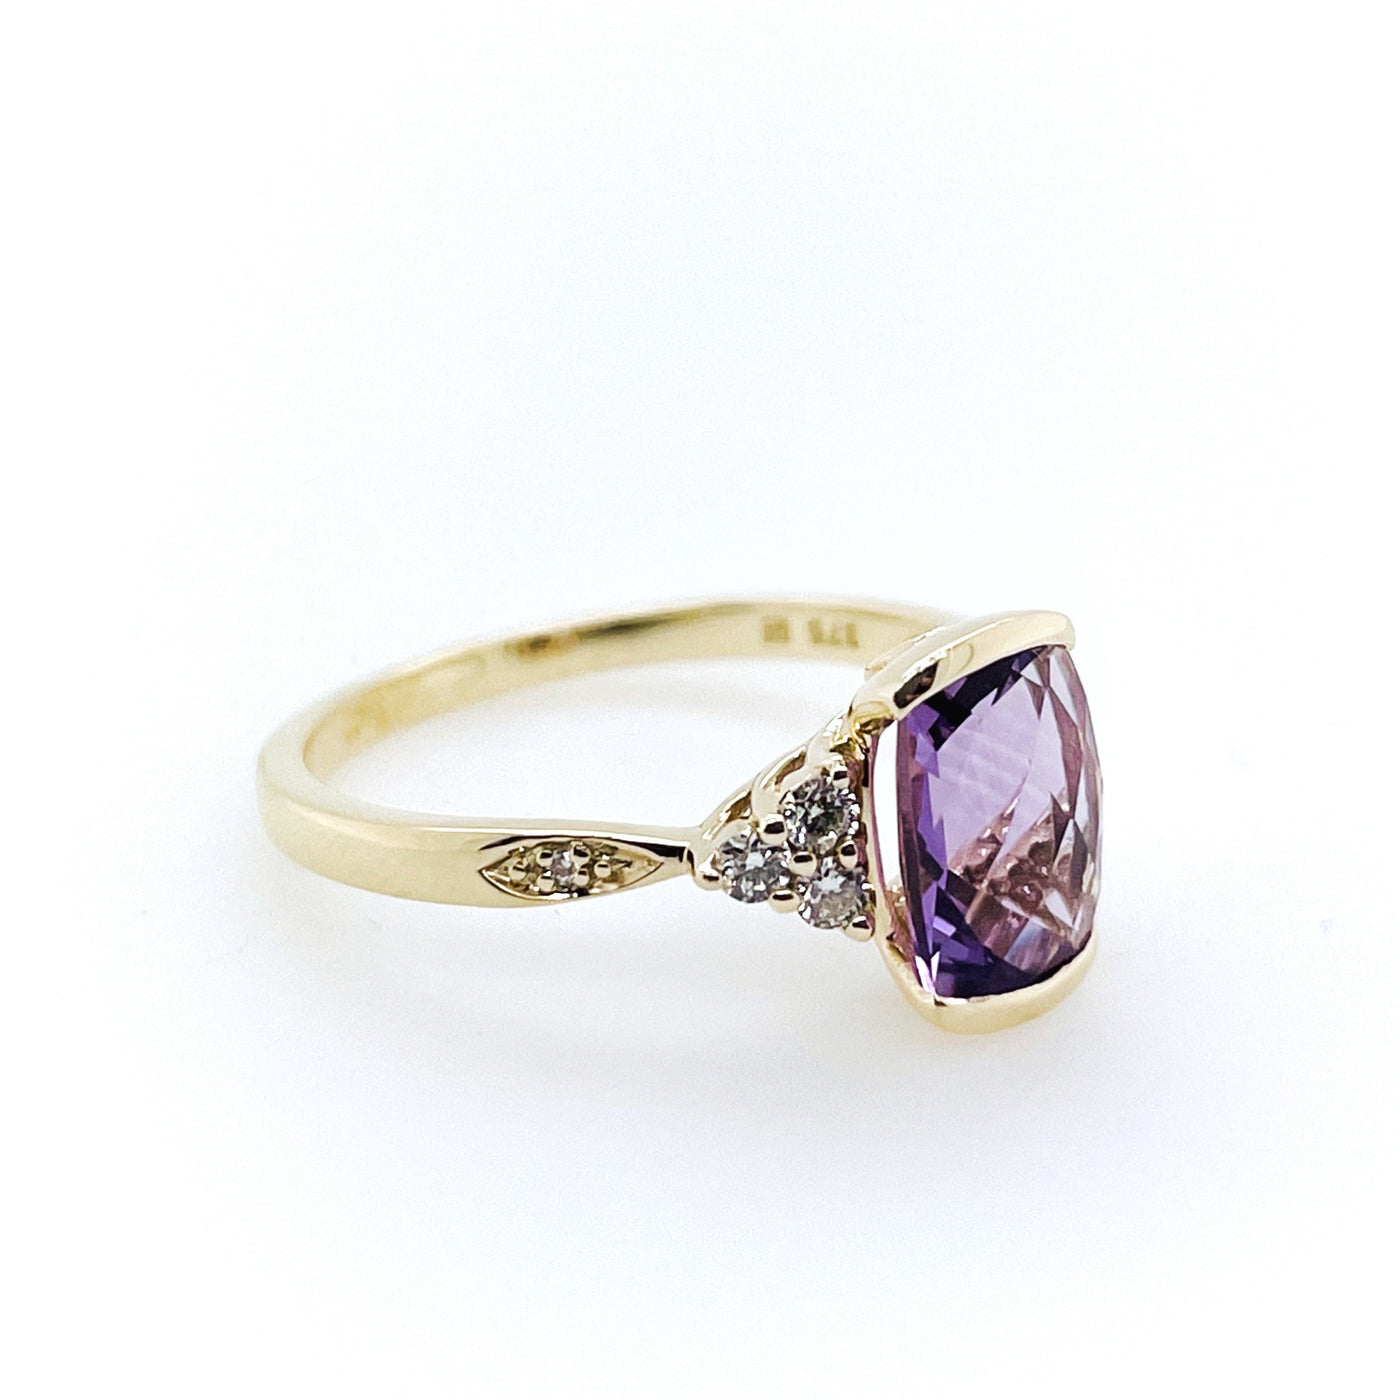 Faceted Cushion Cut Amethyst and Diamond Ring - SOLD OUT